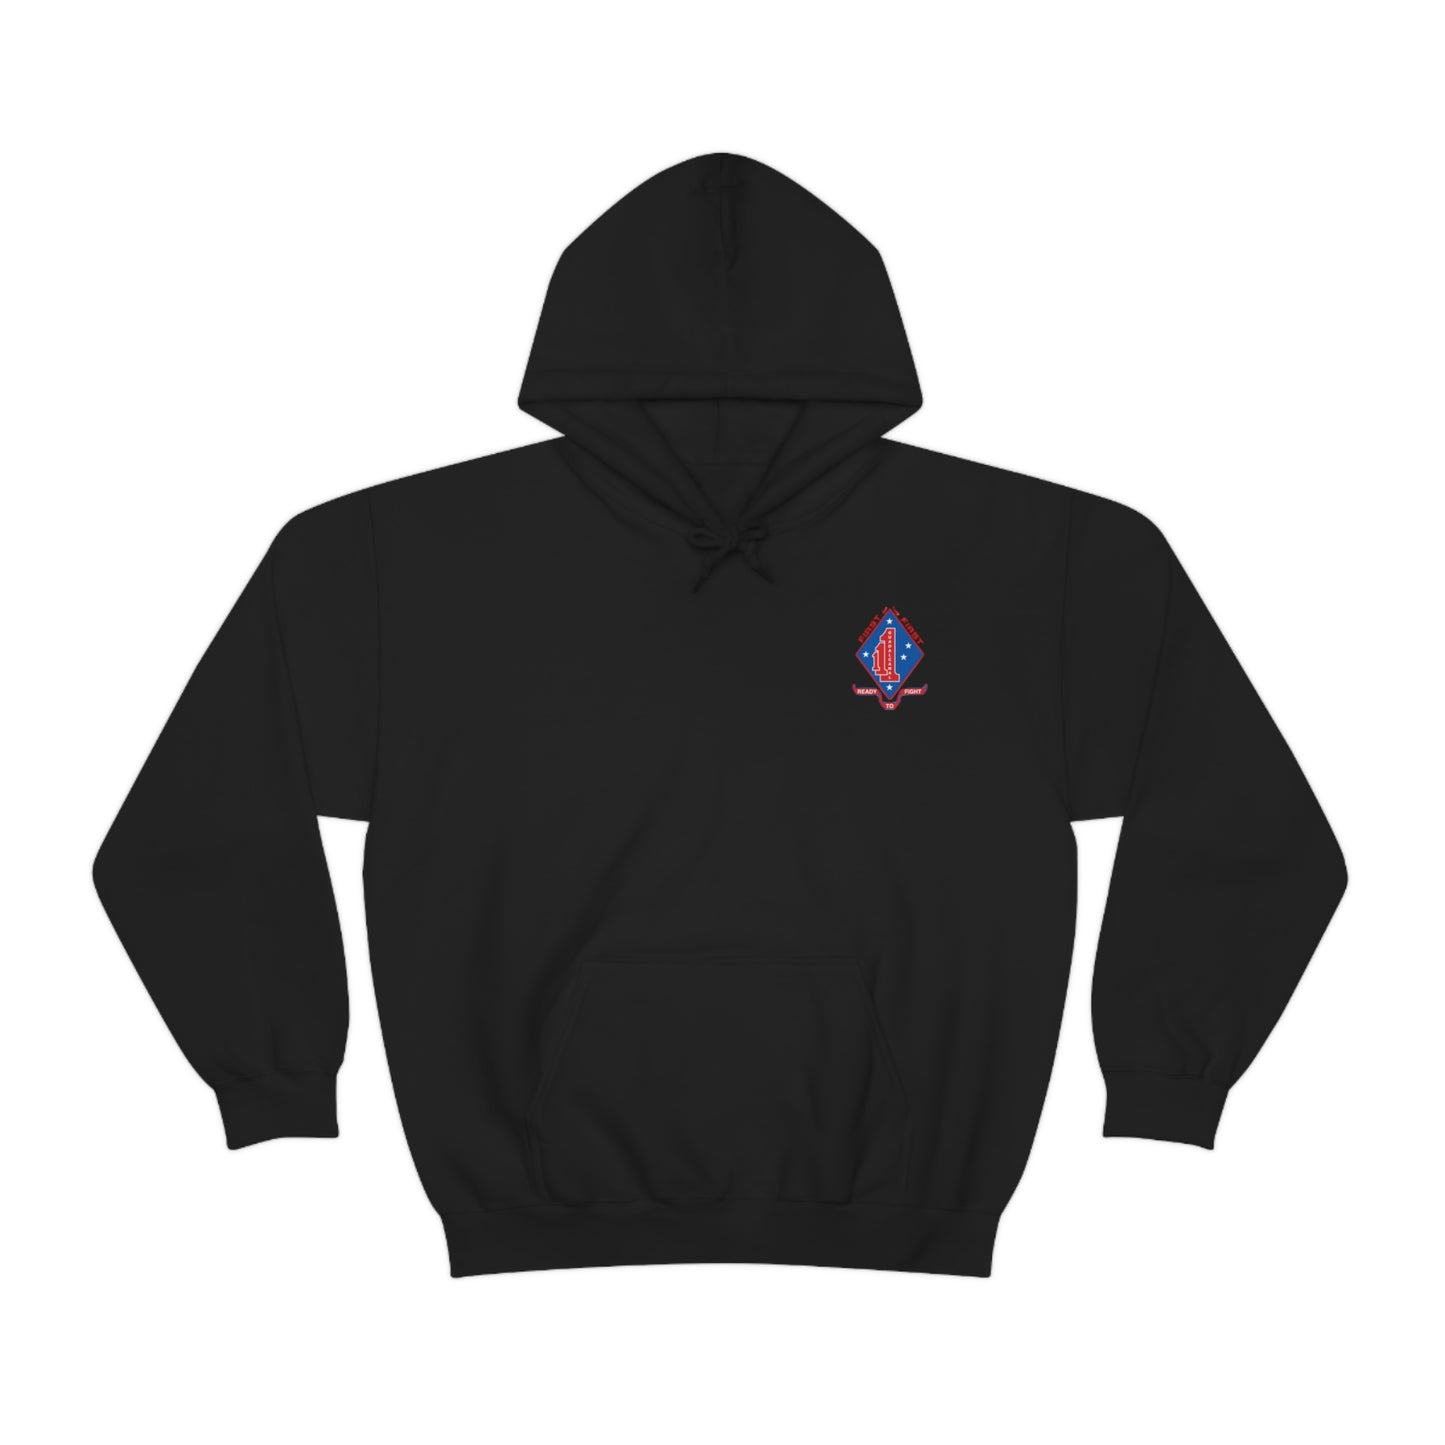 Chosin 1/1 First of the First Hoodie